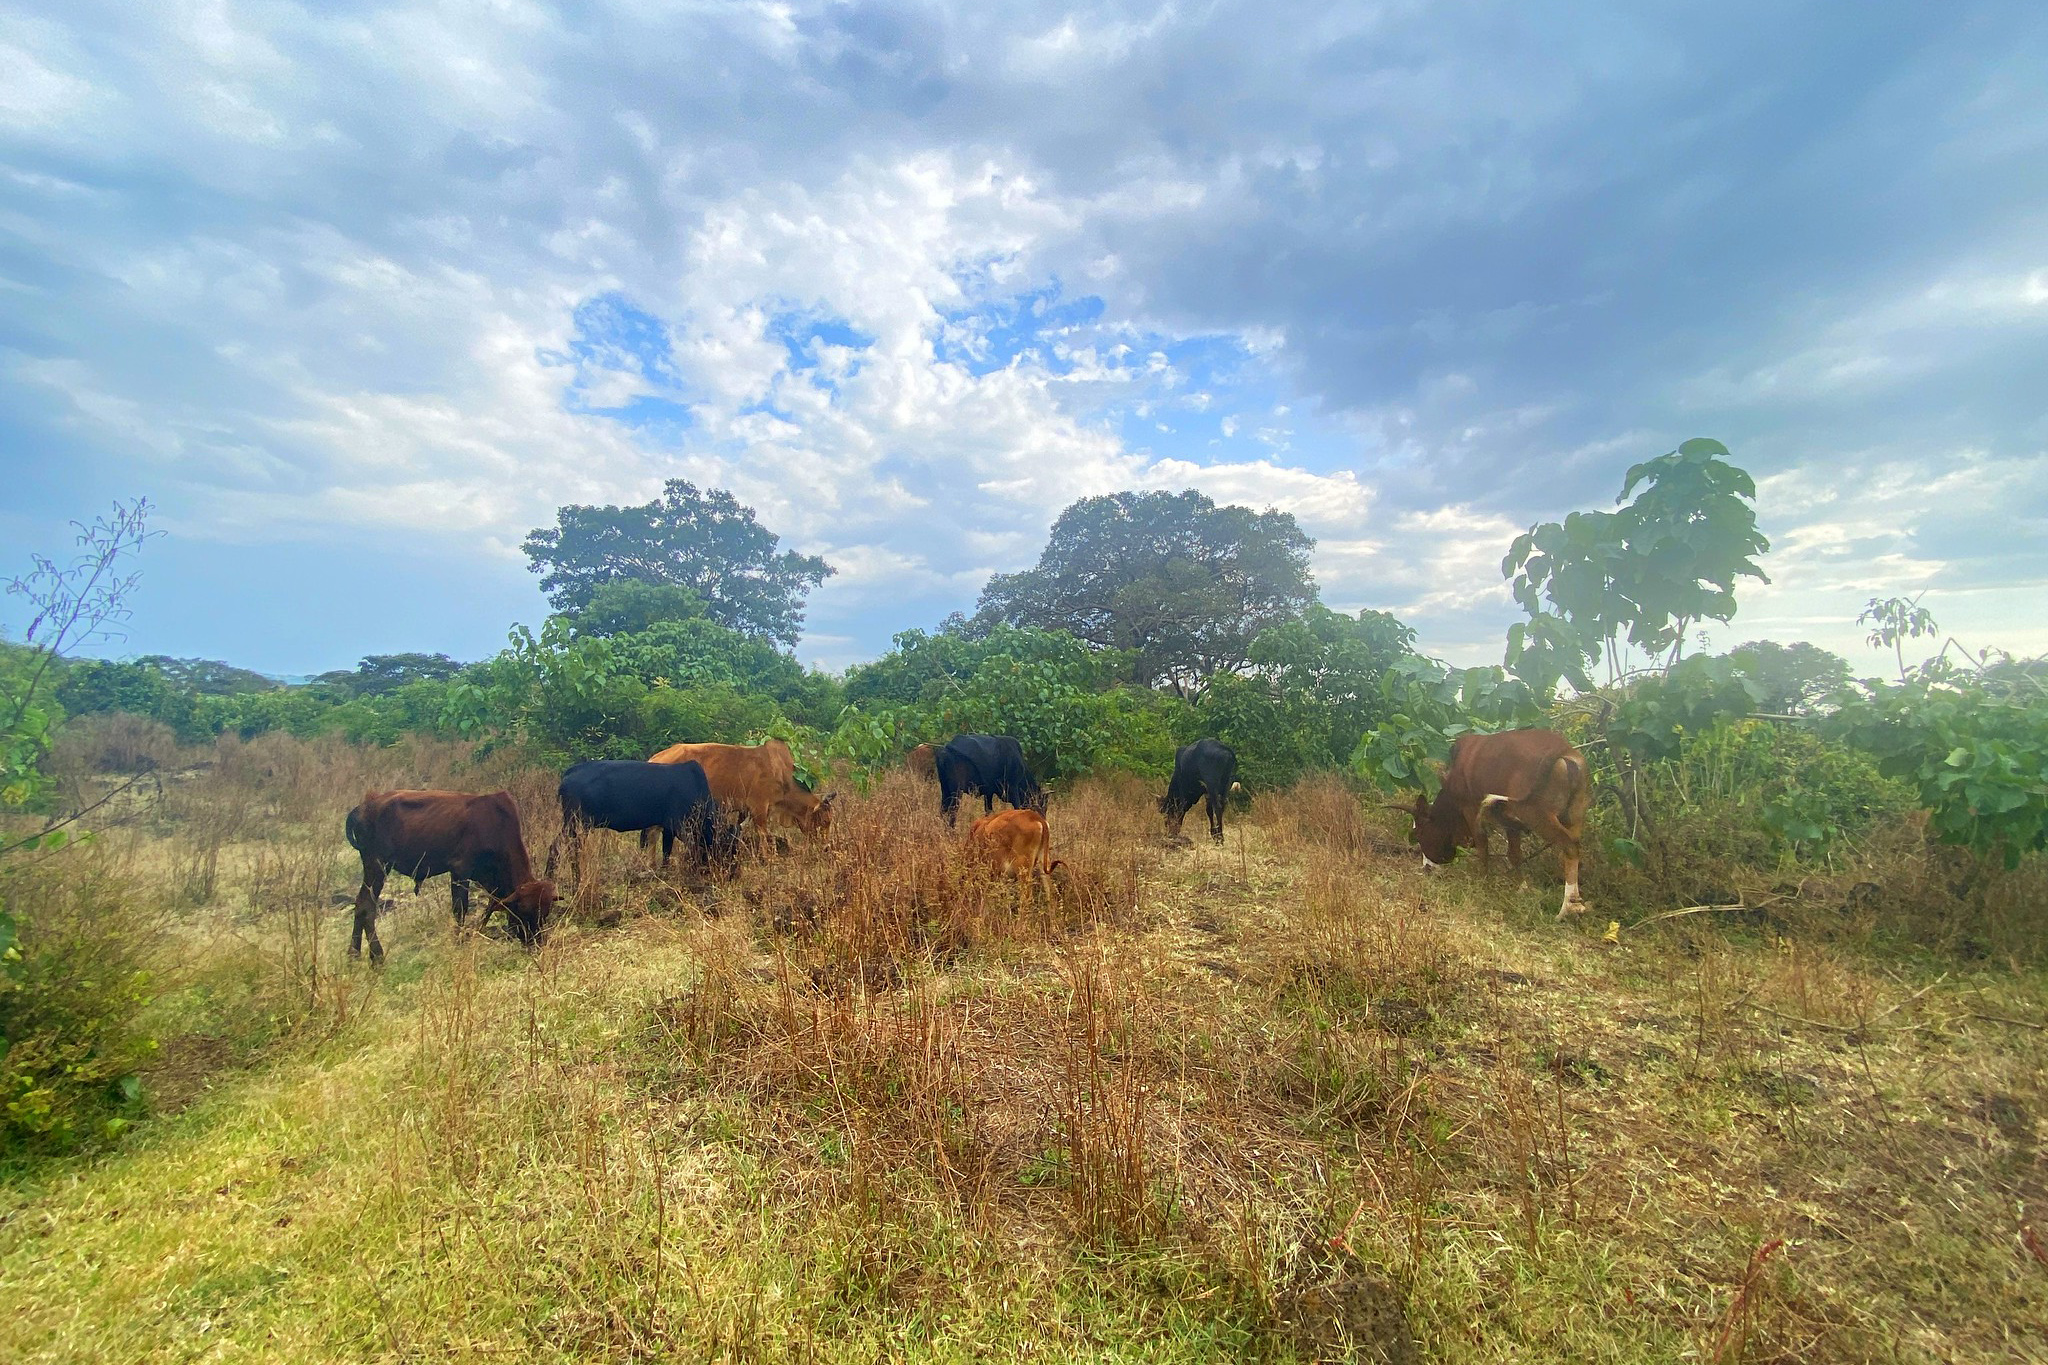 To address unsustainable farming, the project will promote improved breeds (hybrids or crossbreeds), fodder conservation and feed production practices such as crop residue improvement with urea treatment to increase nutritional value. © WeForest